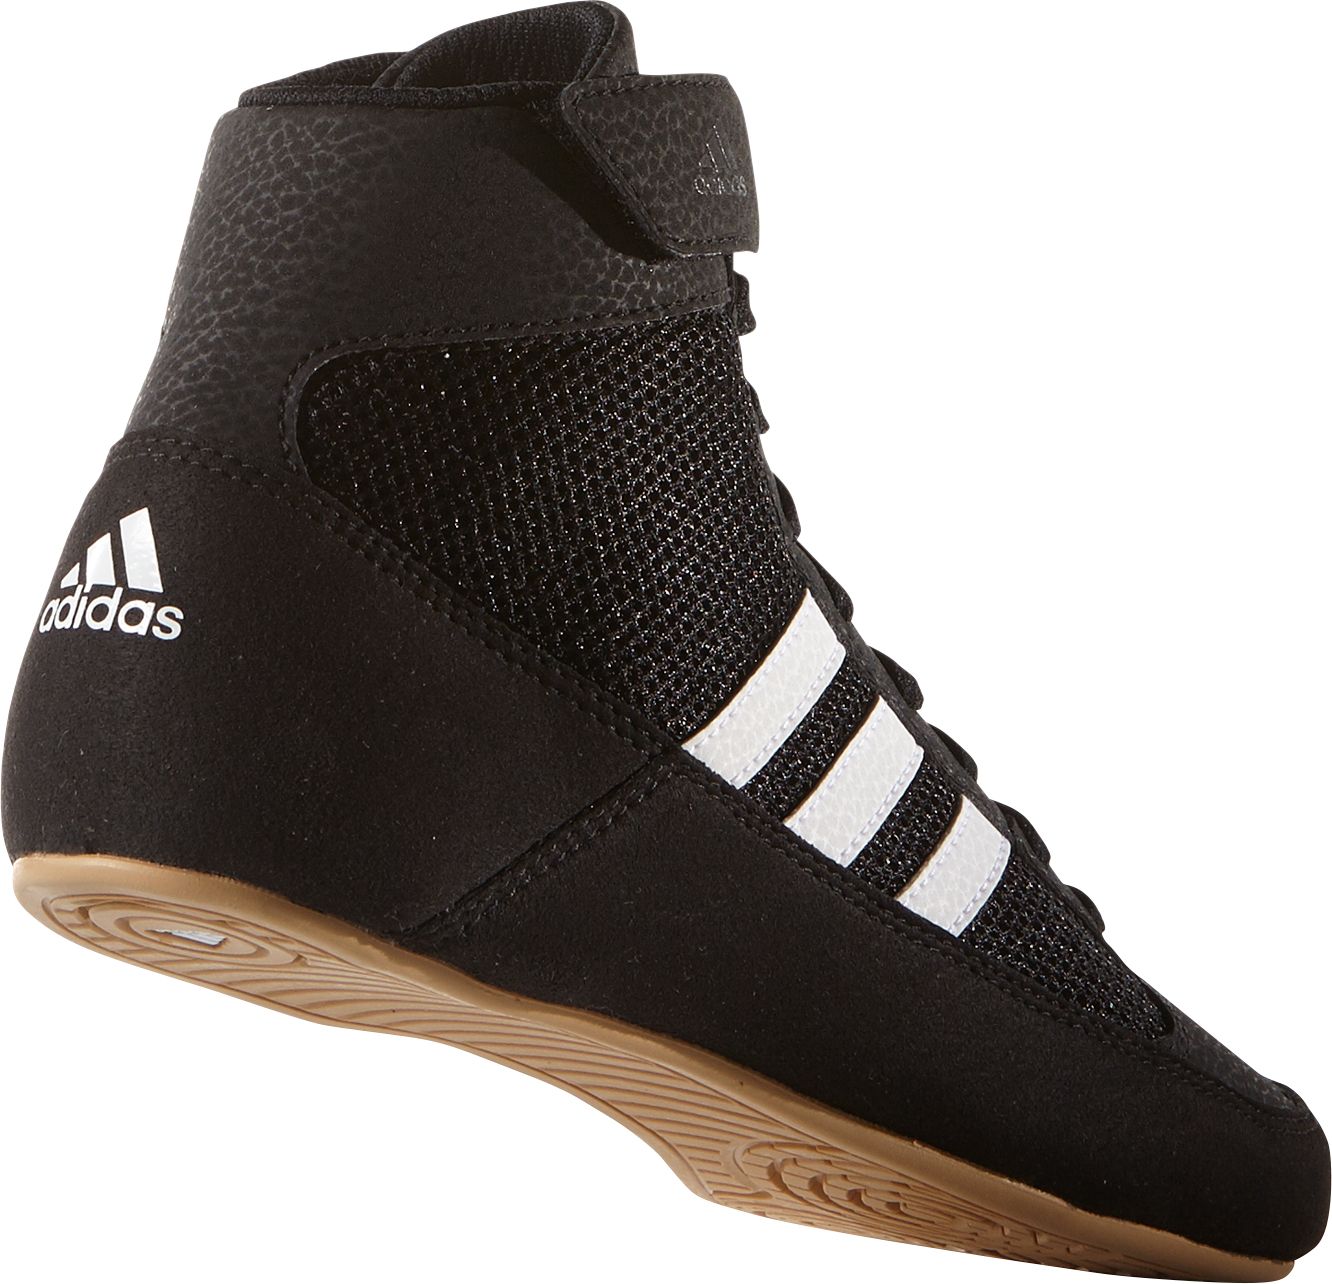 adidas hvc youth wrestling shoes